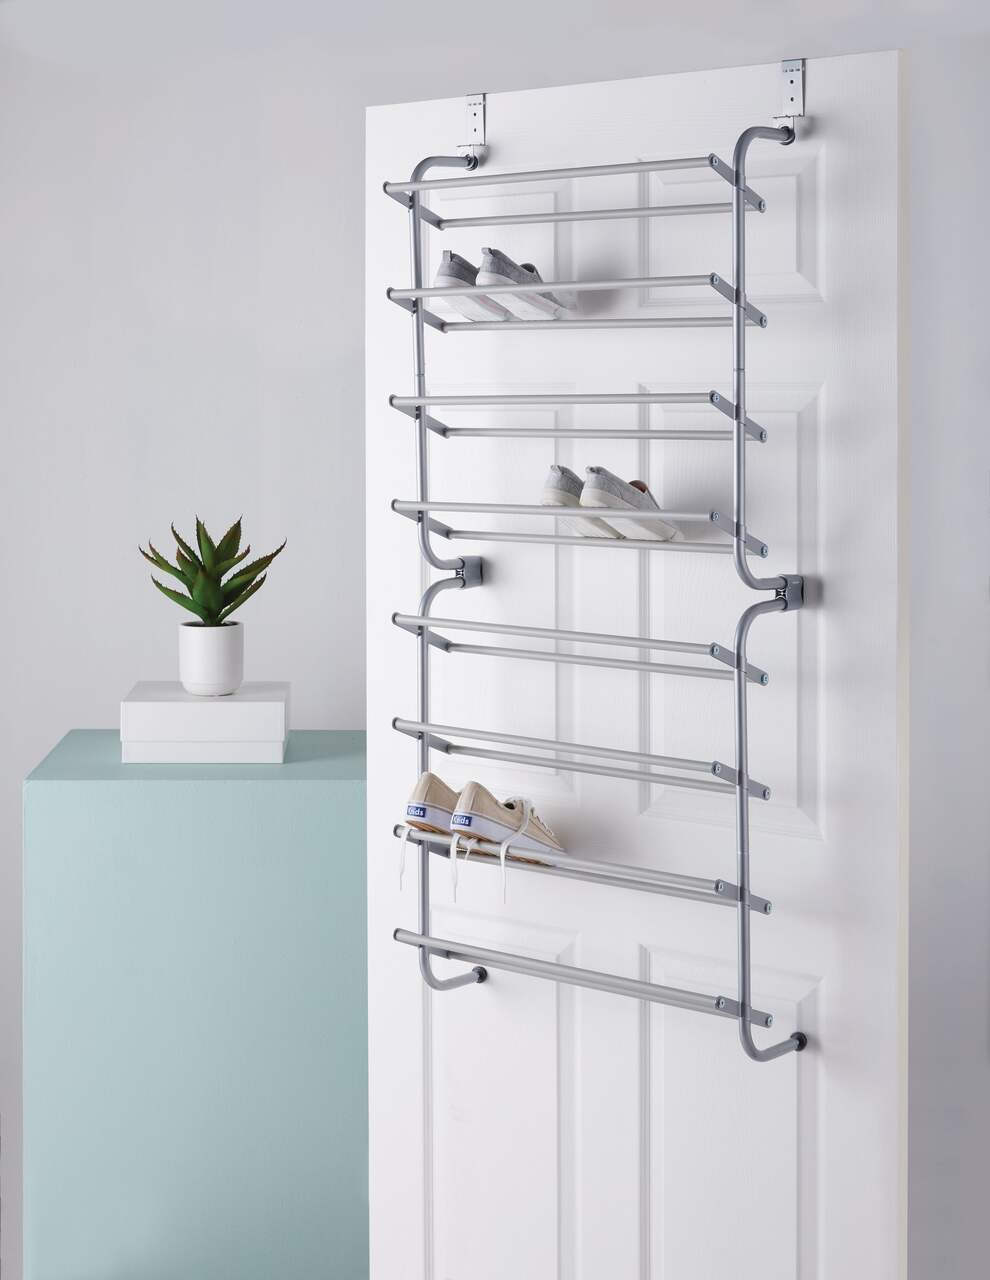 https://media-www.canadiantire.ca/product/living/home-organization/closet-organization/0687700/type-a-over-the-door-shoe-rack-1971d739-fe71-4049-b3dd-8676915e8d7a-jpgrendition.jpg?imdensity=1&imwidth=1244&impolicy=mZoom